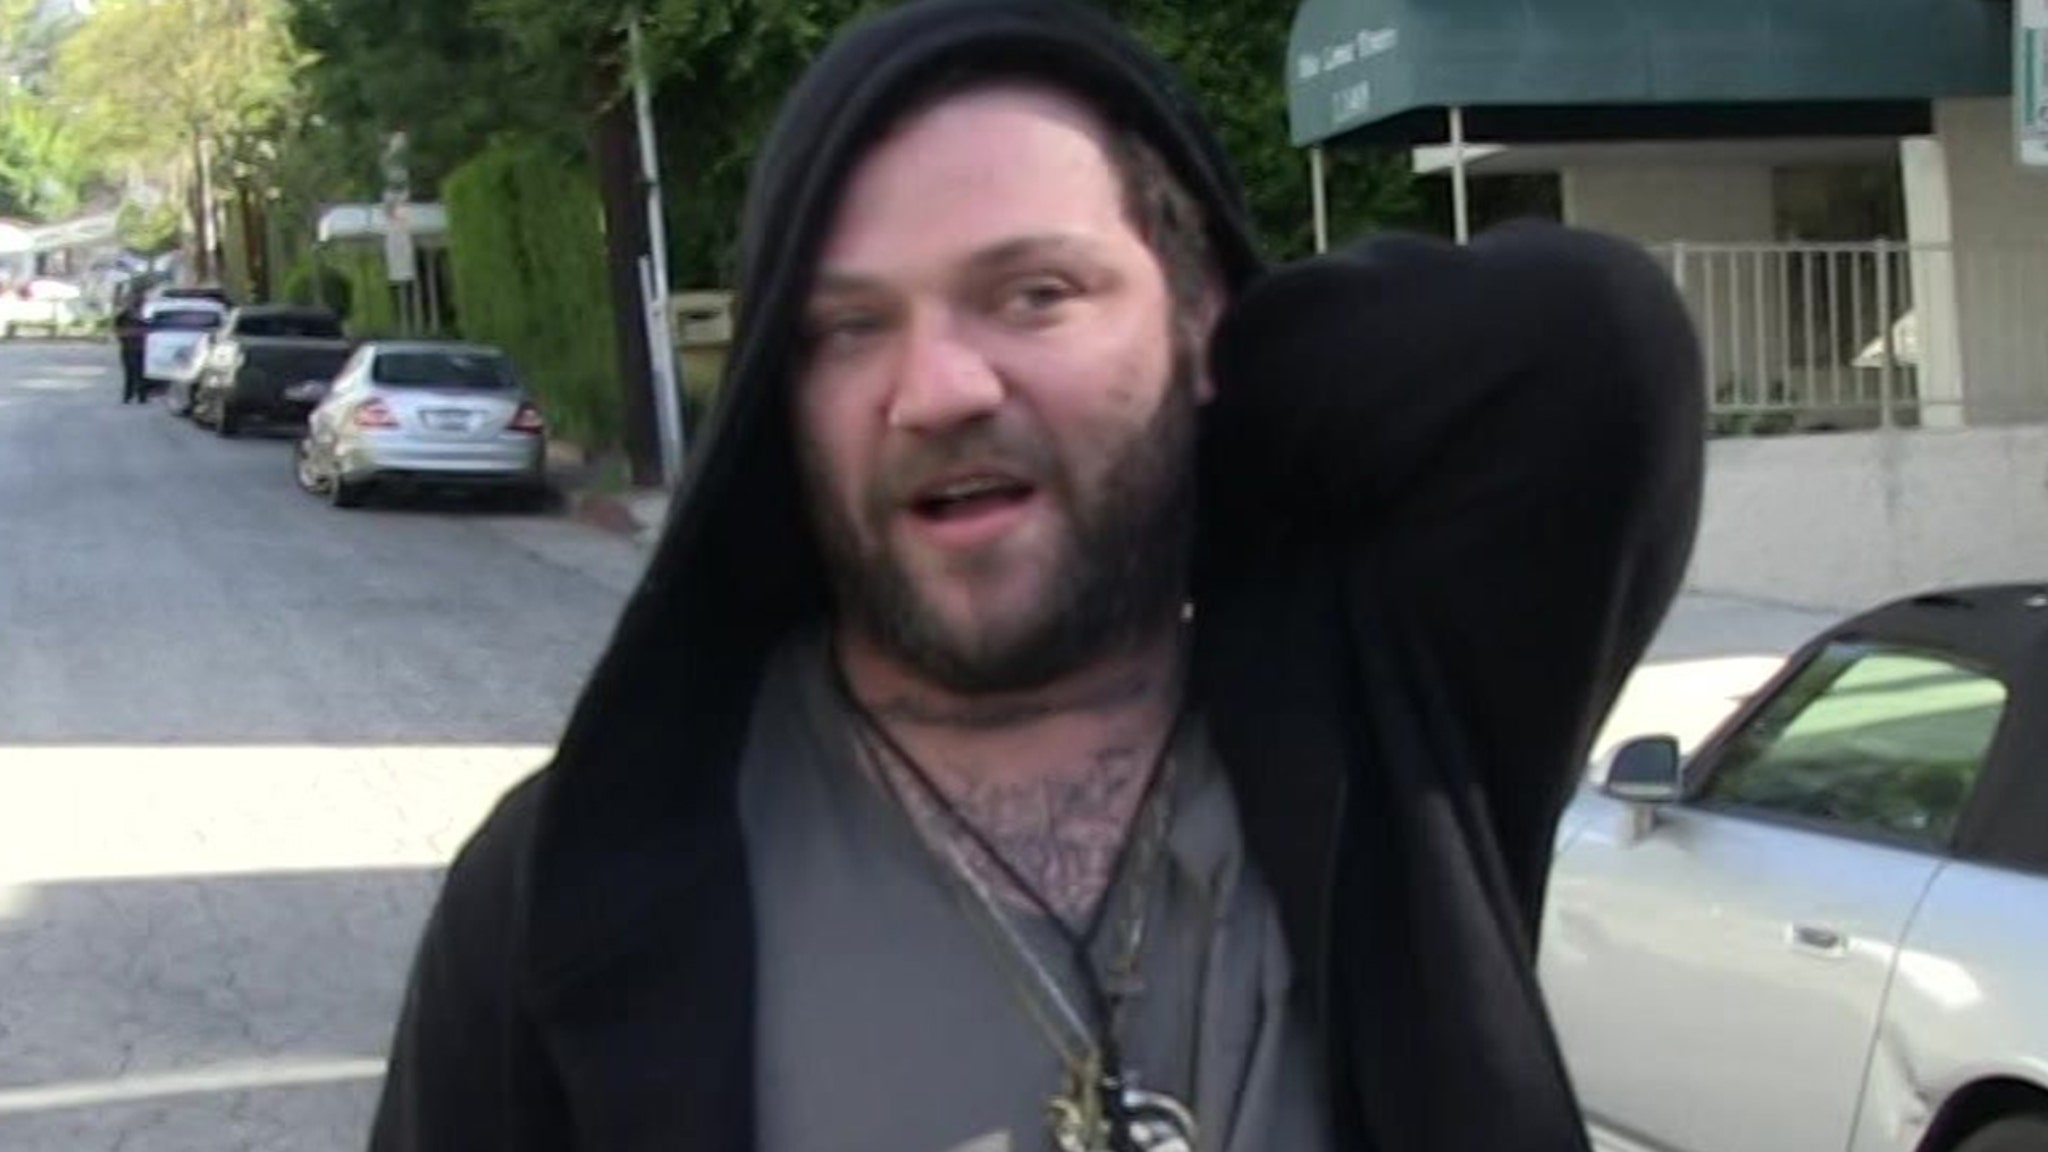 Bam Margera Arrested For Domestic Violence, Allegedly Kicked Woman